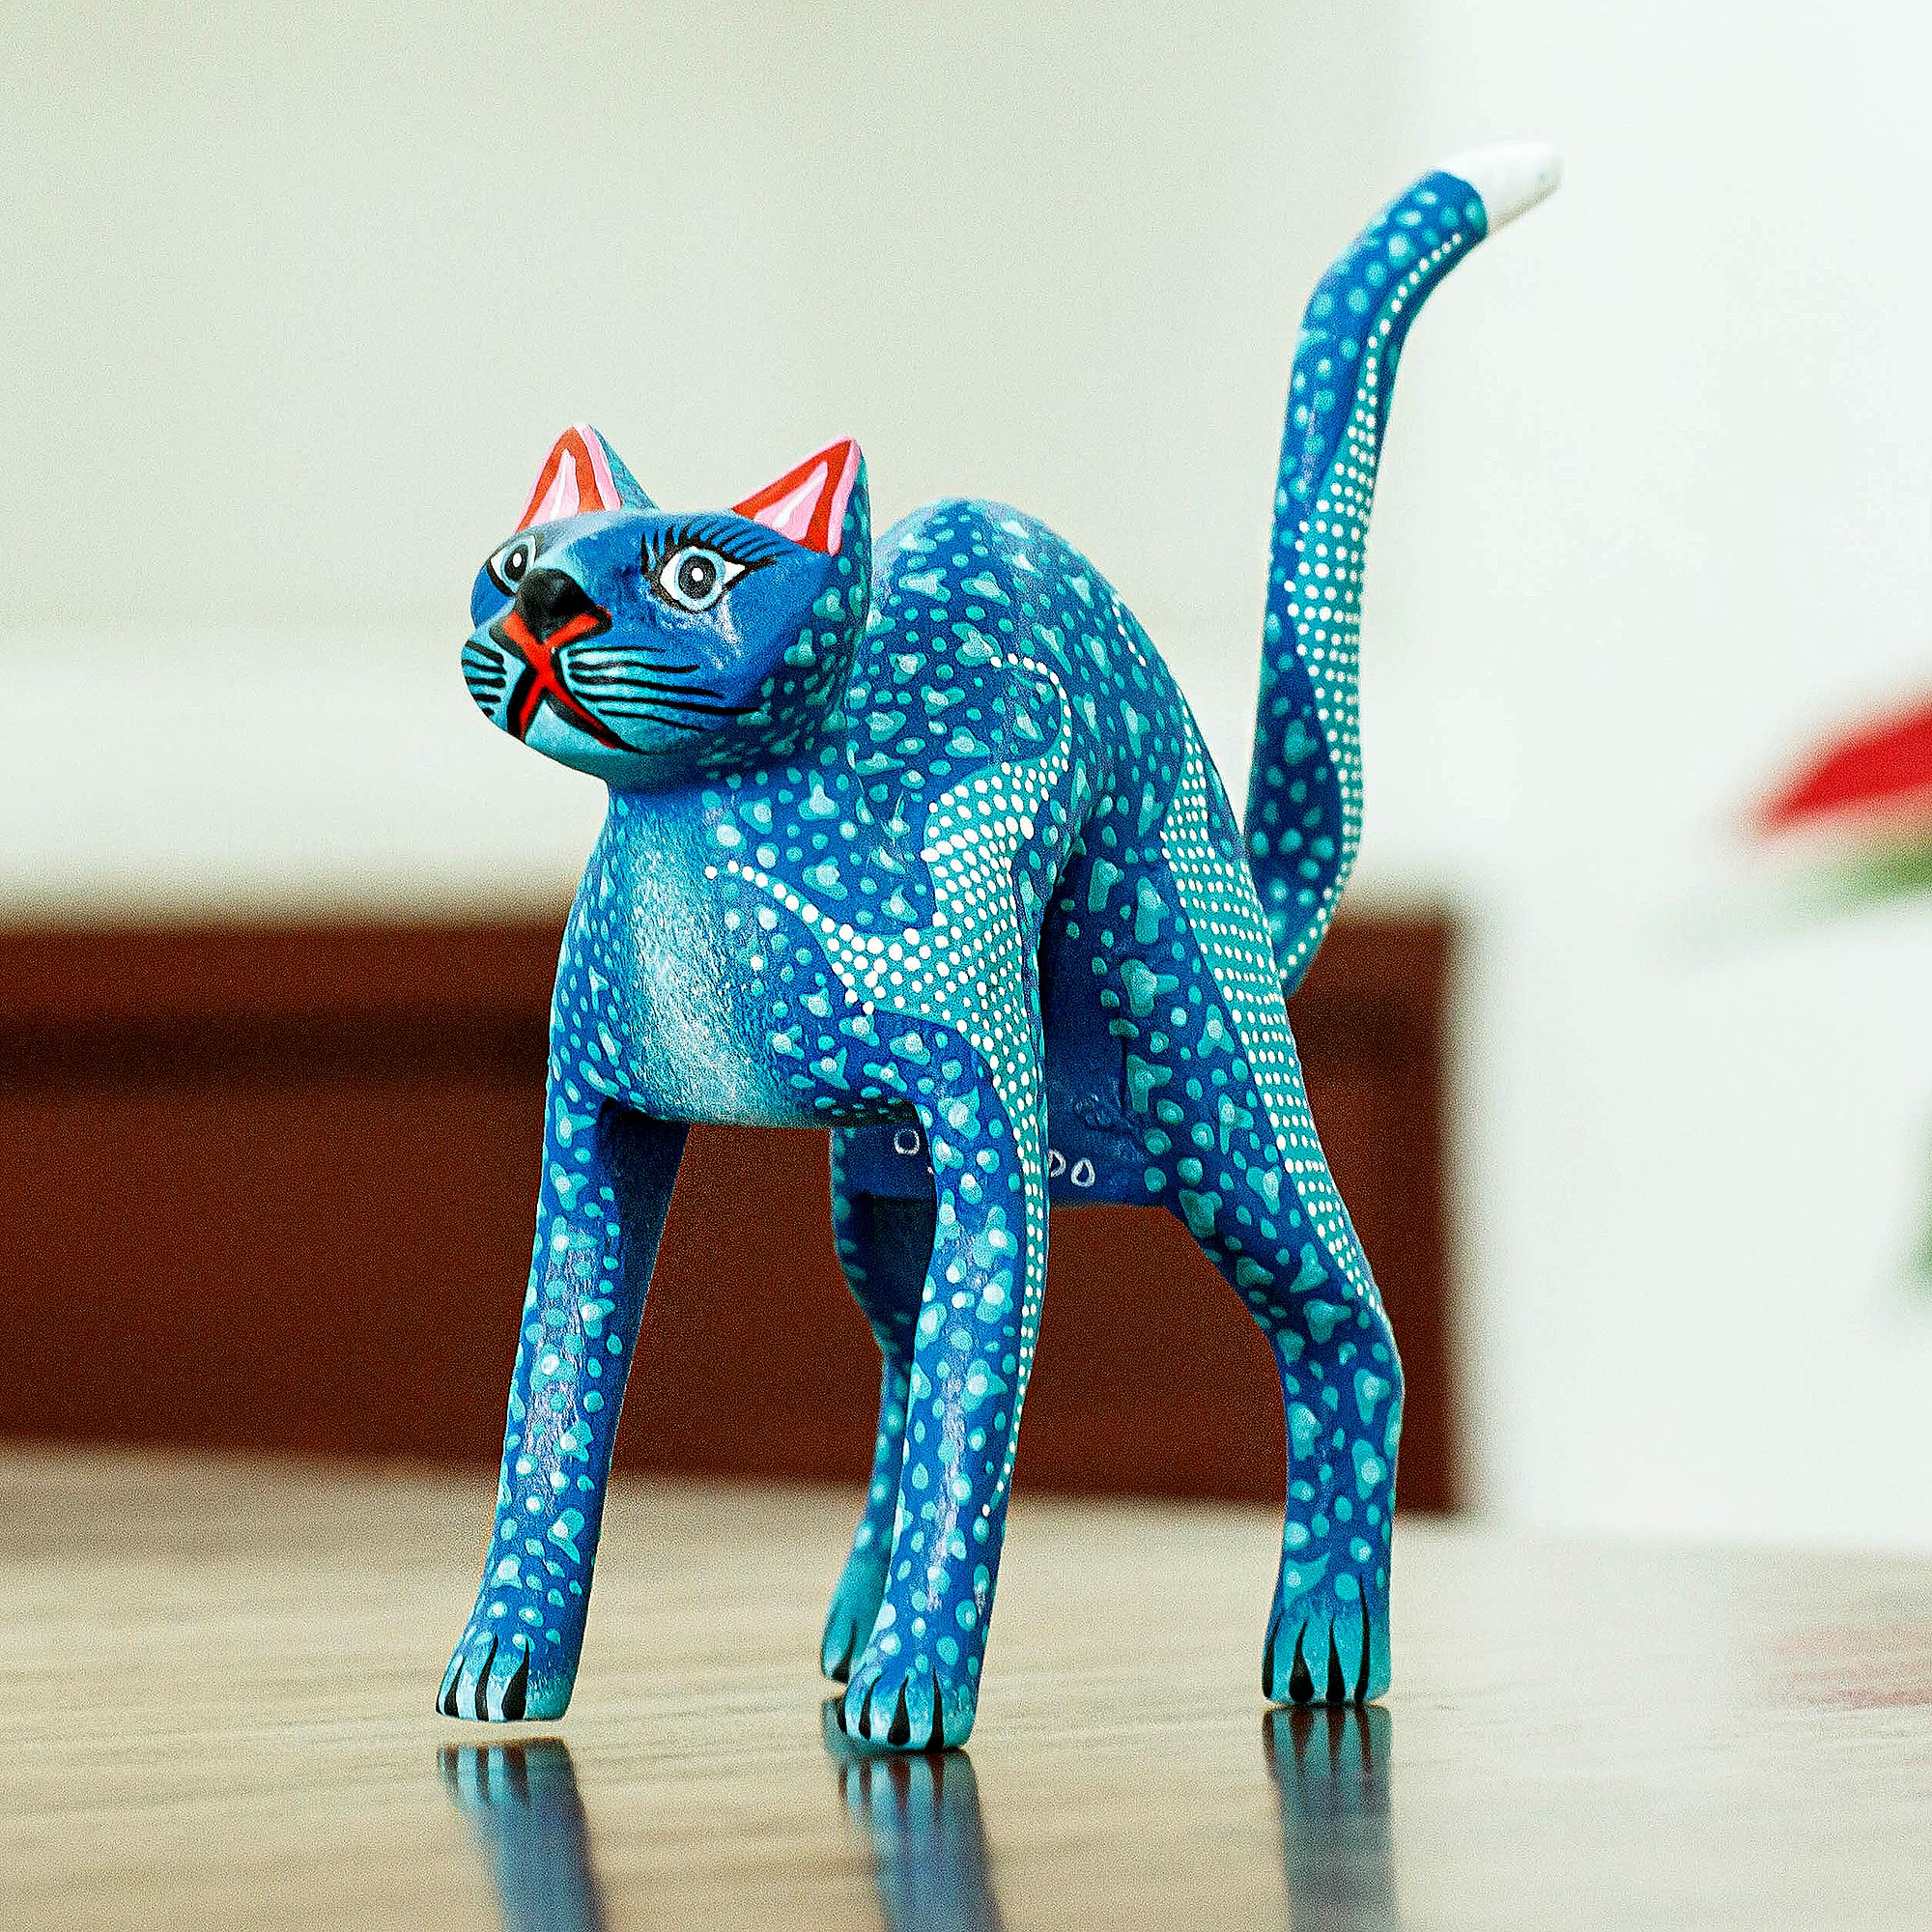 Wood Cat Alebrije Figurine in Teal Hand-Painted in Mexico, 'Curious Cat in  Teal